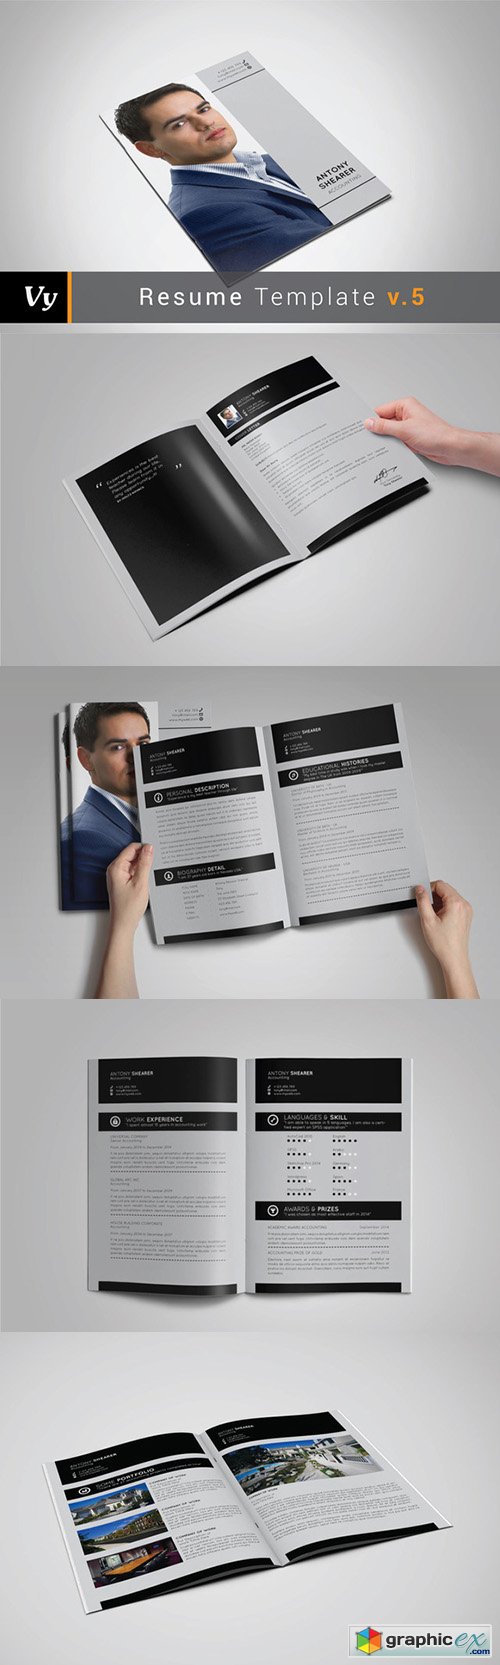  Booklet Resume Template